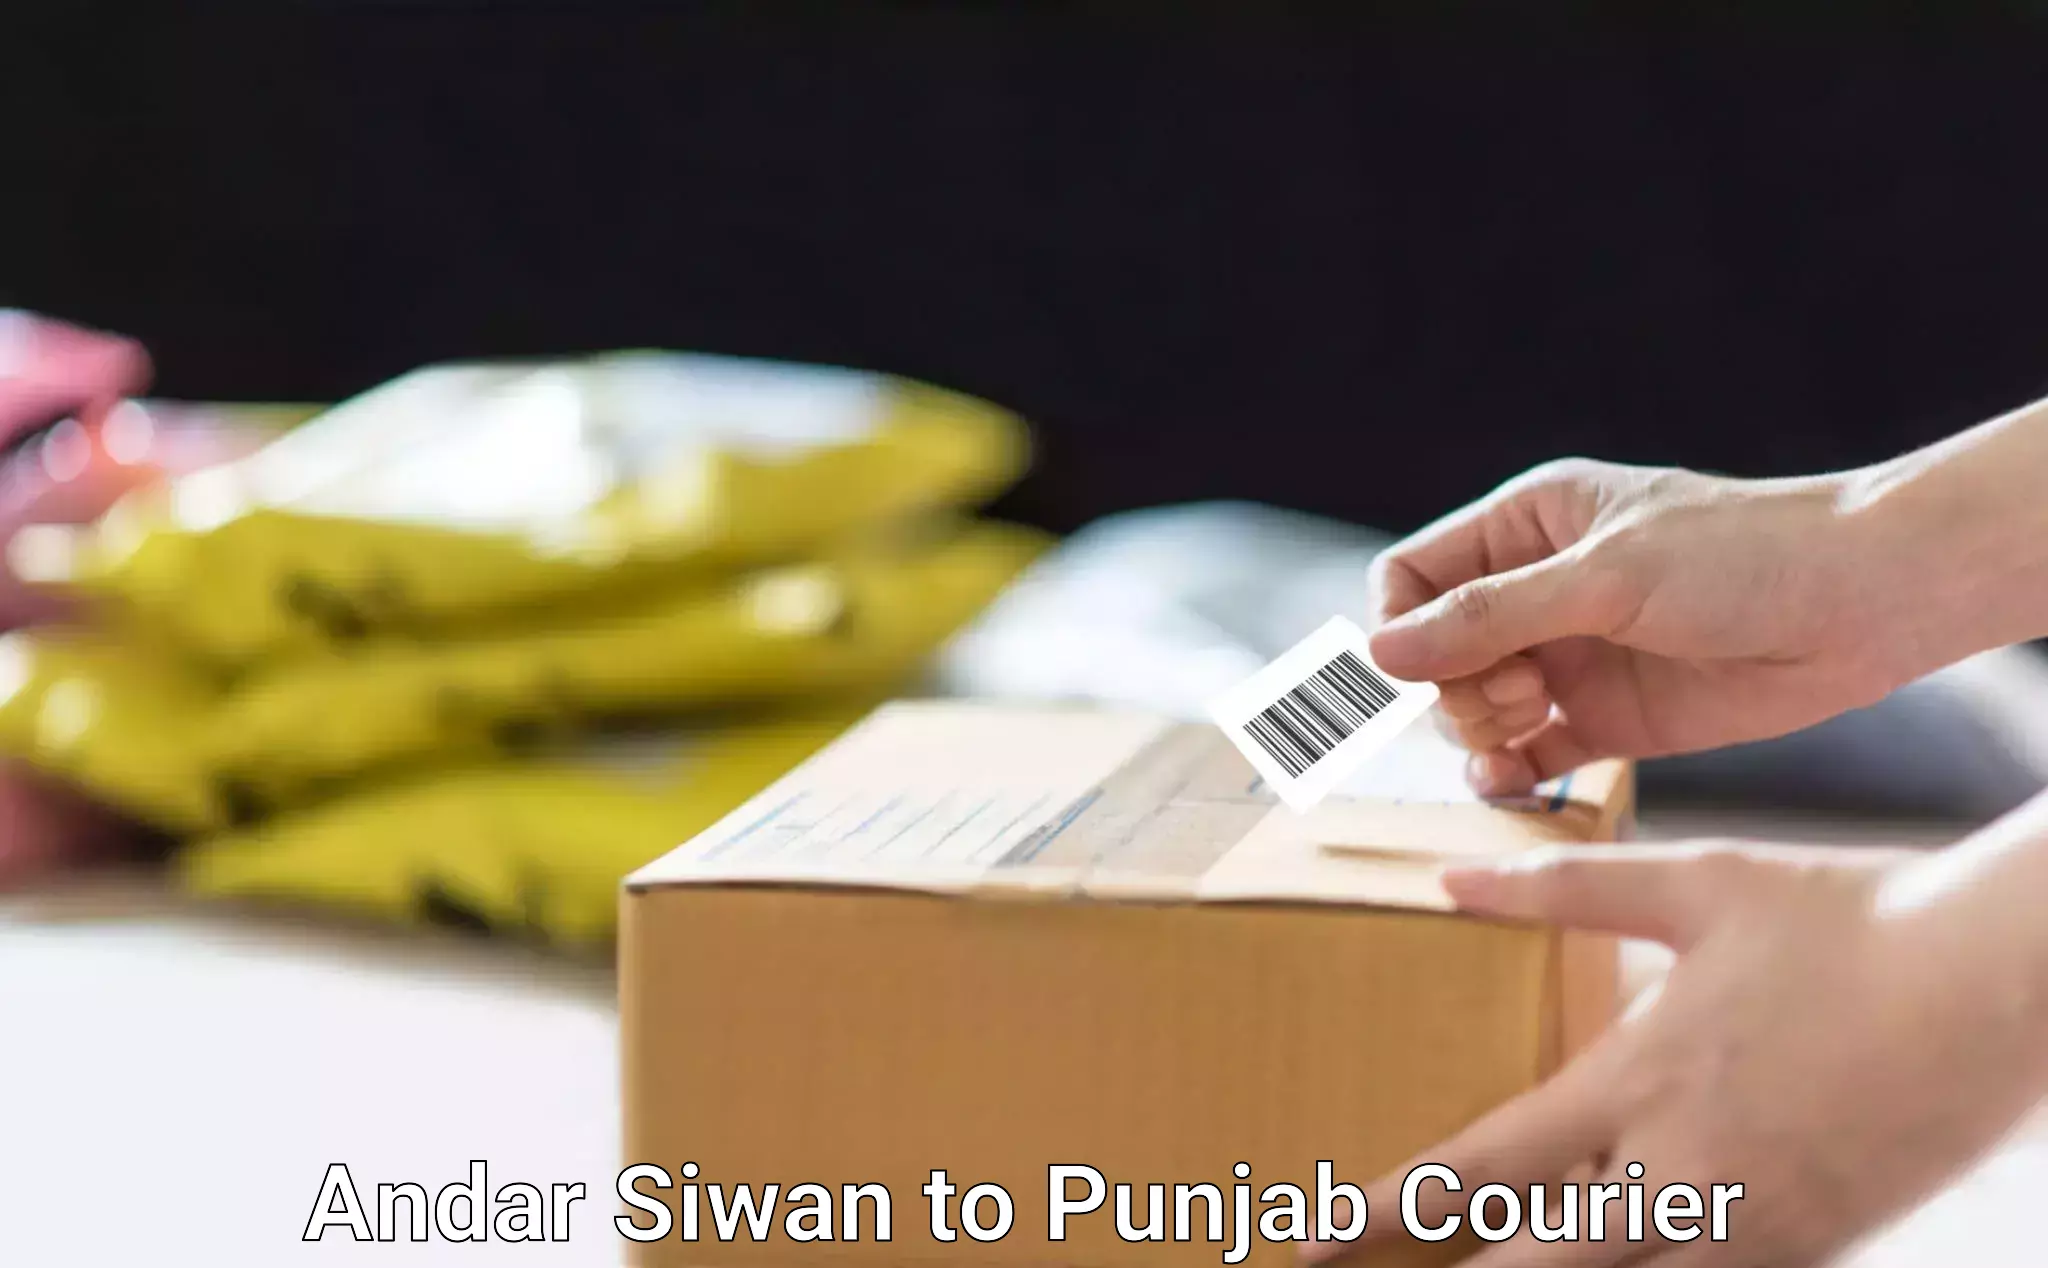 Customized relocation services Andar Siwan to Punjab